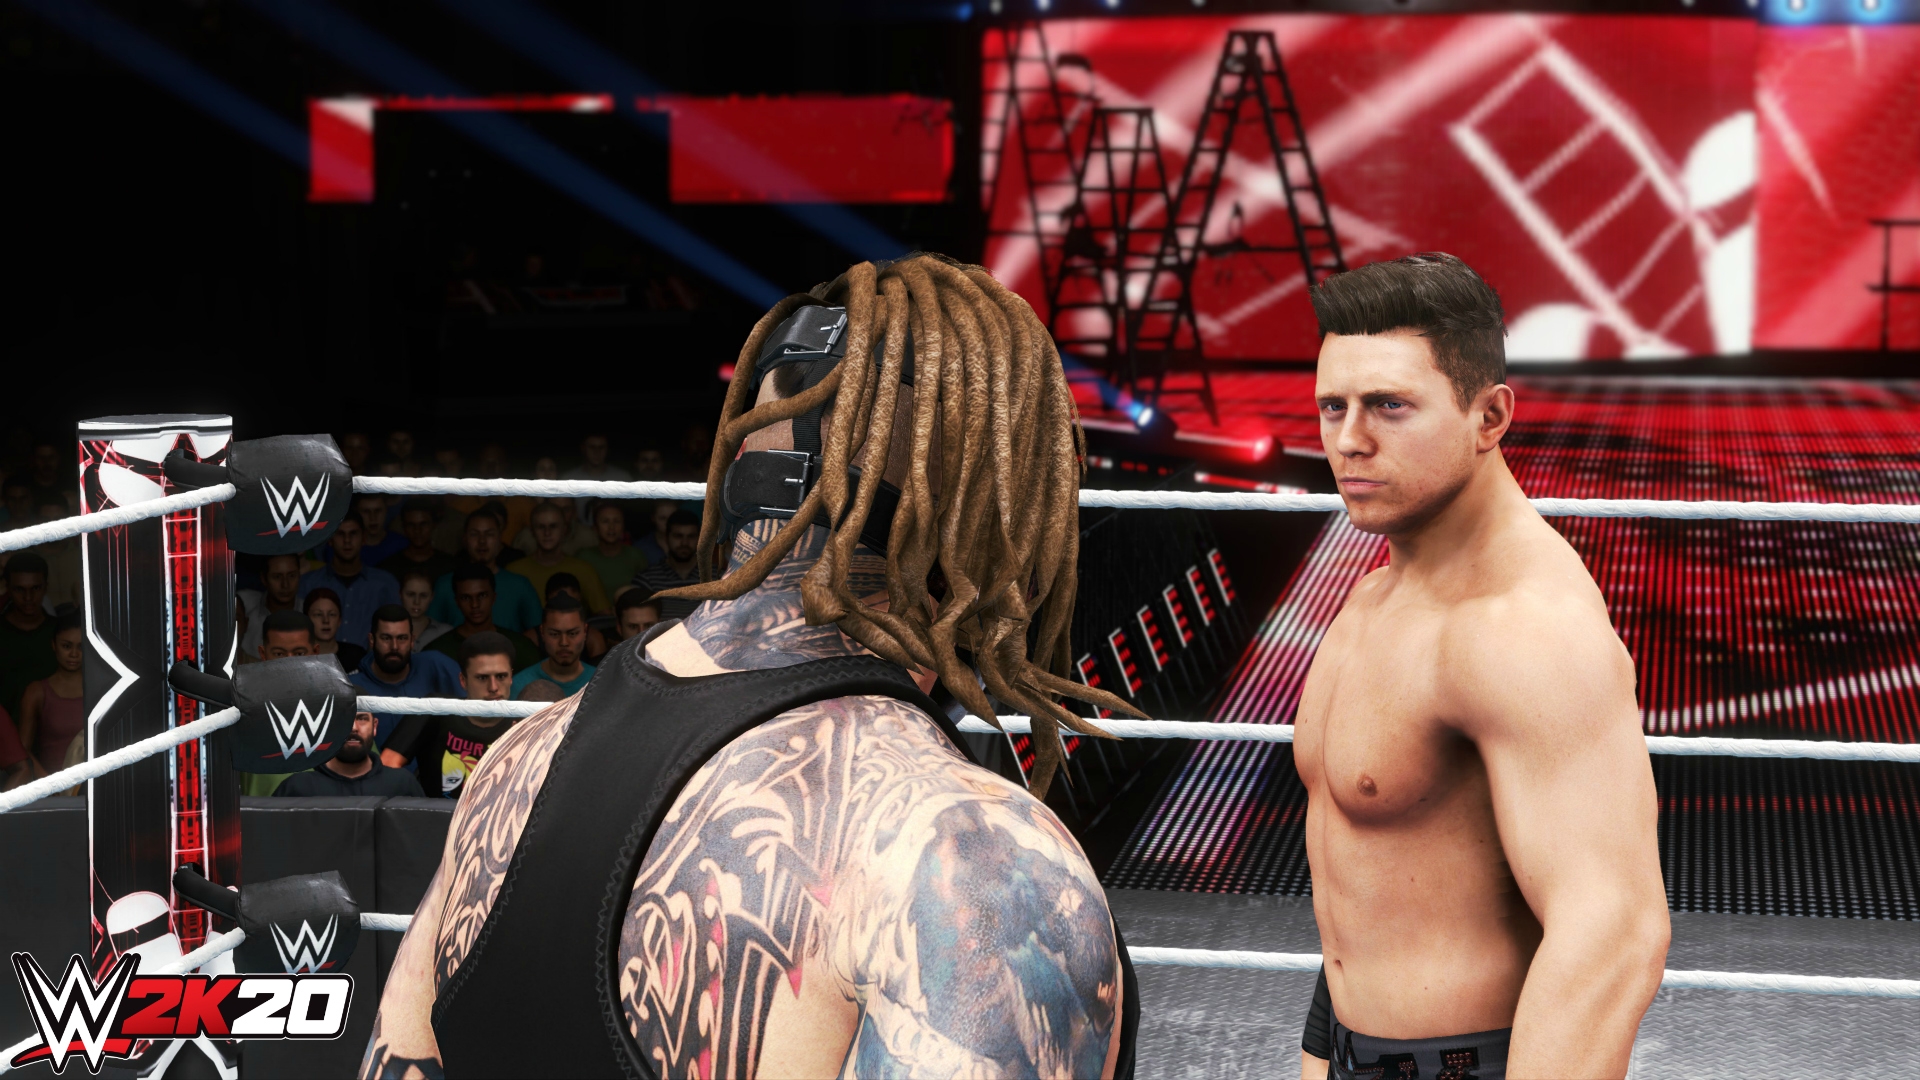 WWE 2K20 December Patch Update Fixes More Bugs And Adds Create-A-Championship